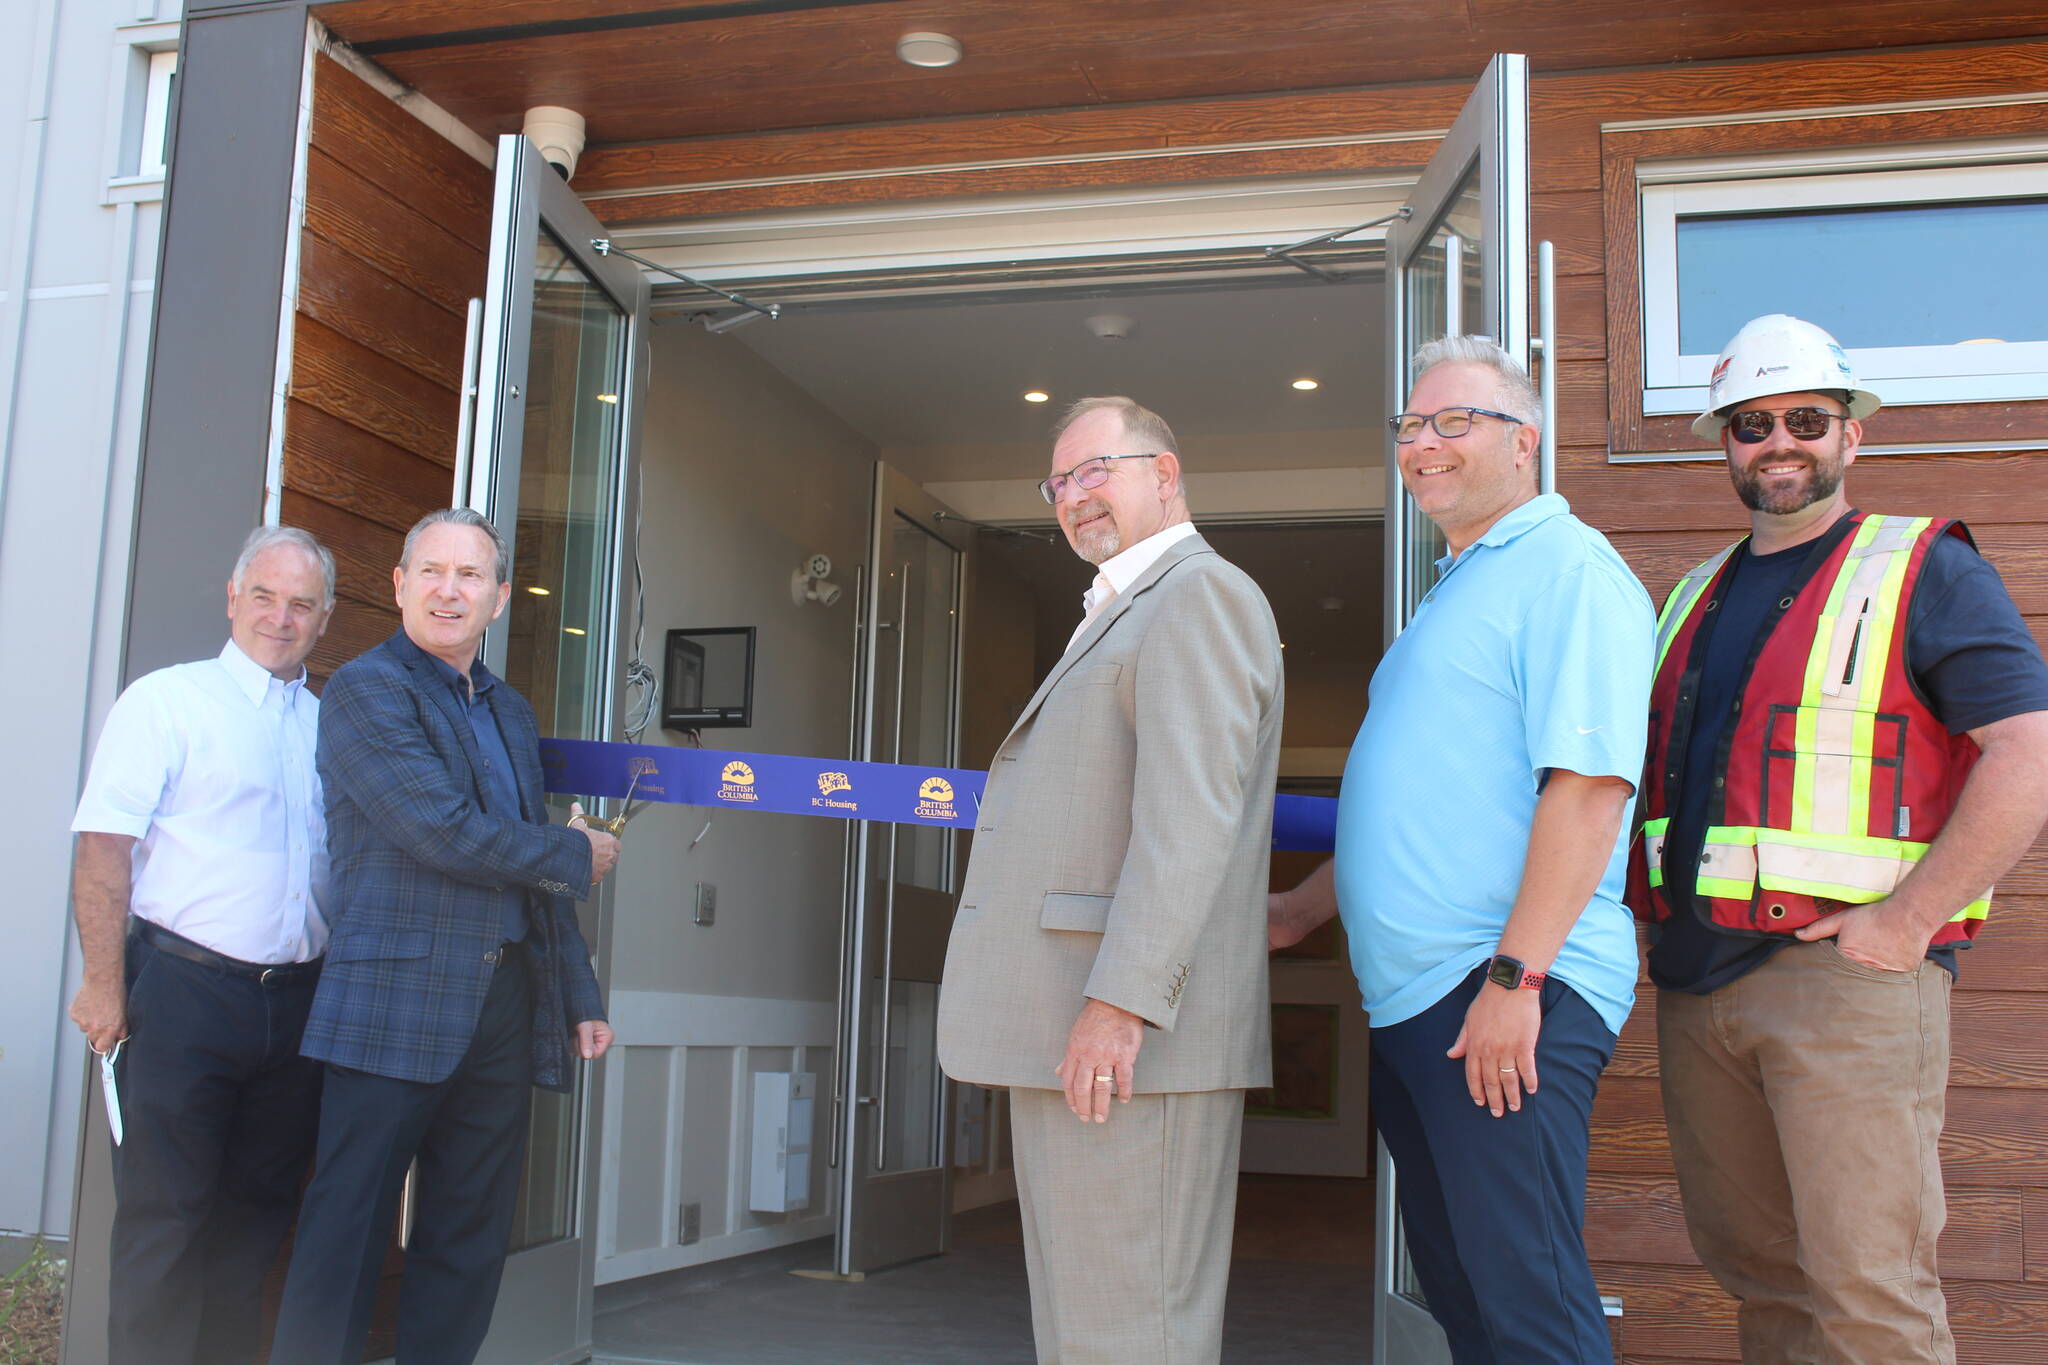 David Raven (Vice-chair, CBT), Randy Driediger (Chairperson, RCHS), Gary Sulz (Revelstoke Mayor), Kelly Miller (BC Housing), and Scott Robertson (Absolute Contracting) cutting the ribbon on July 28. (Josh Piercey/Revelstoke Review)